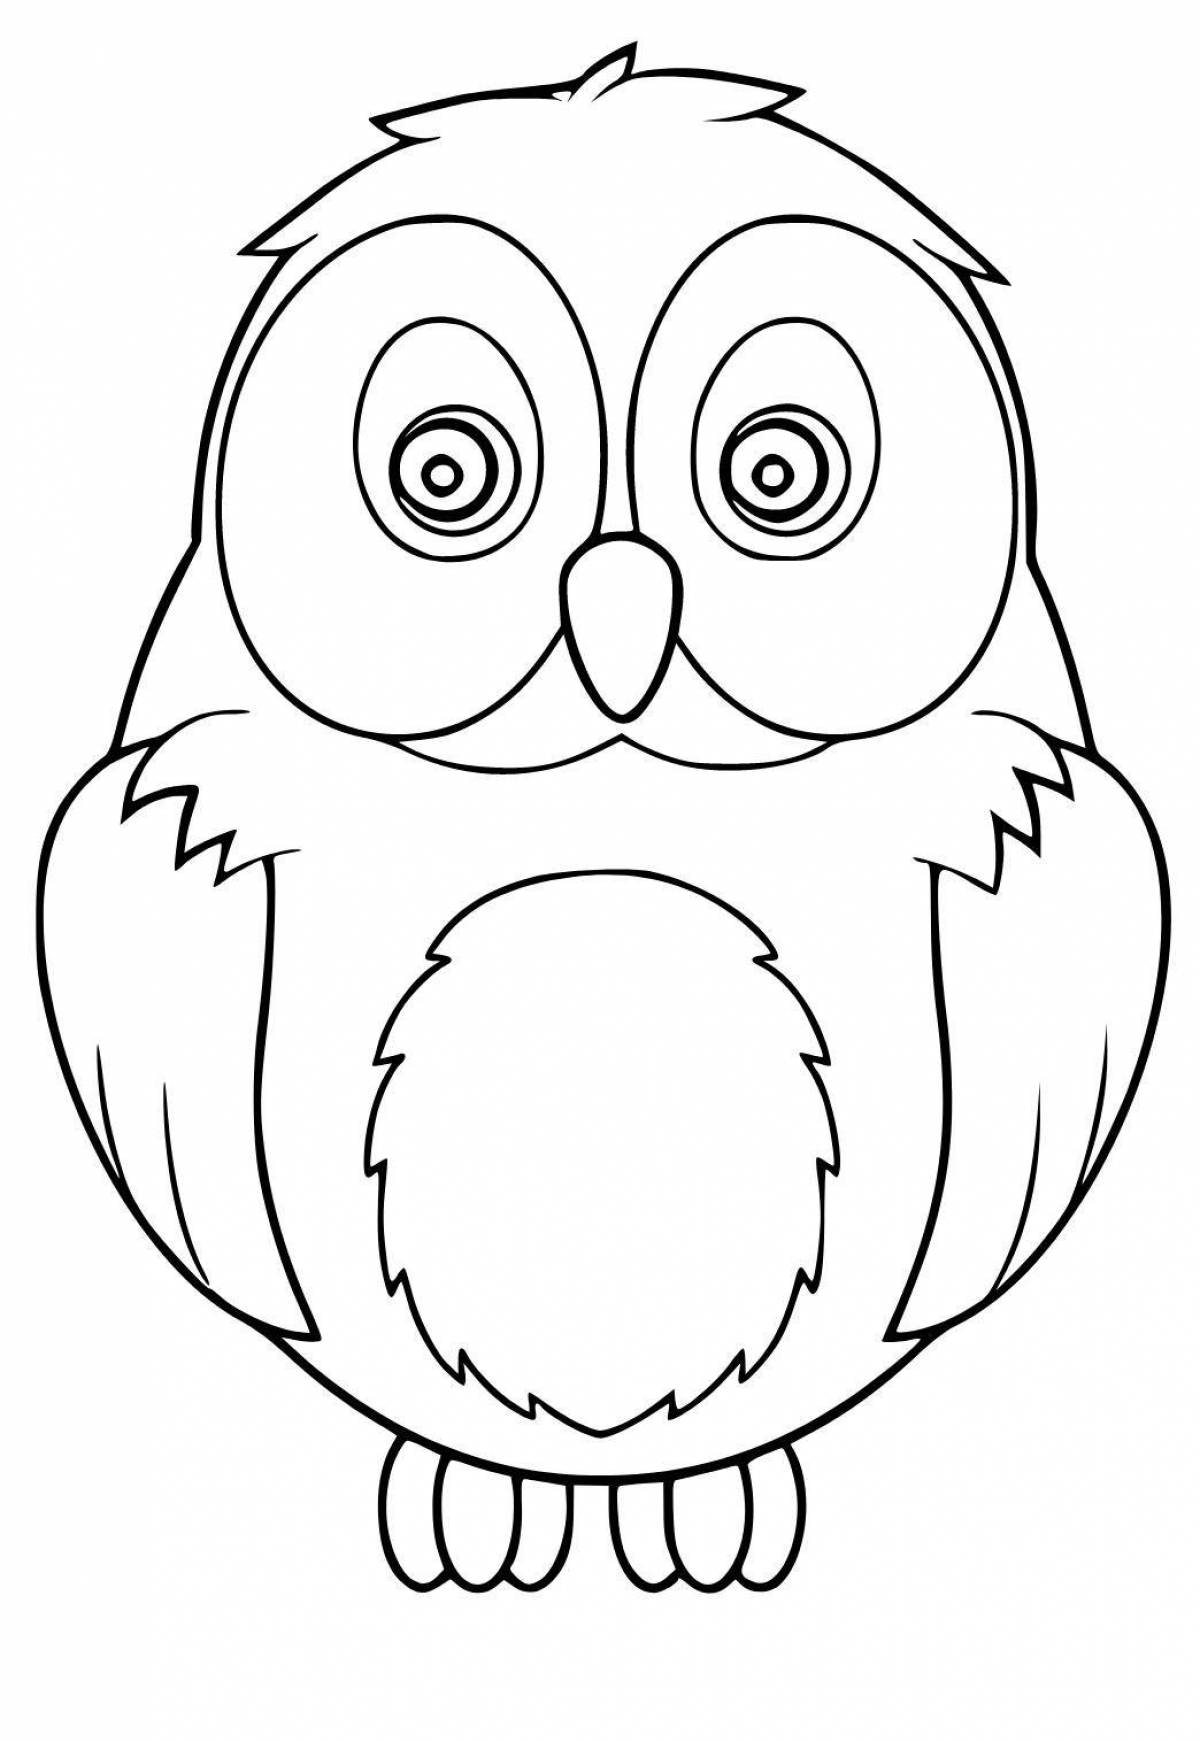 Winnie the pooh owl sparkling coloring book